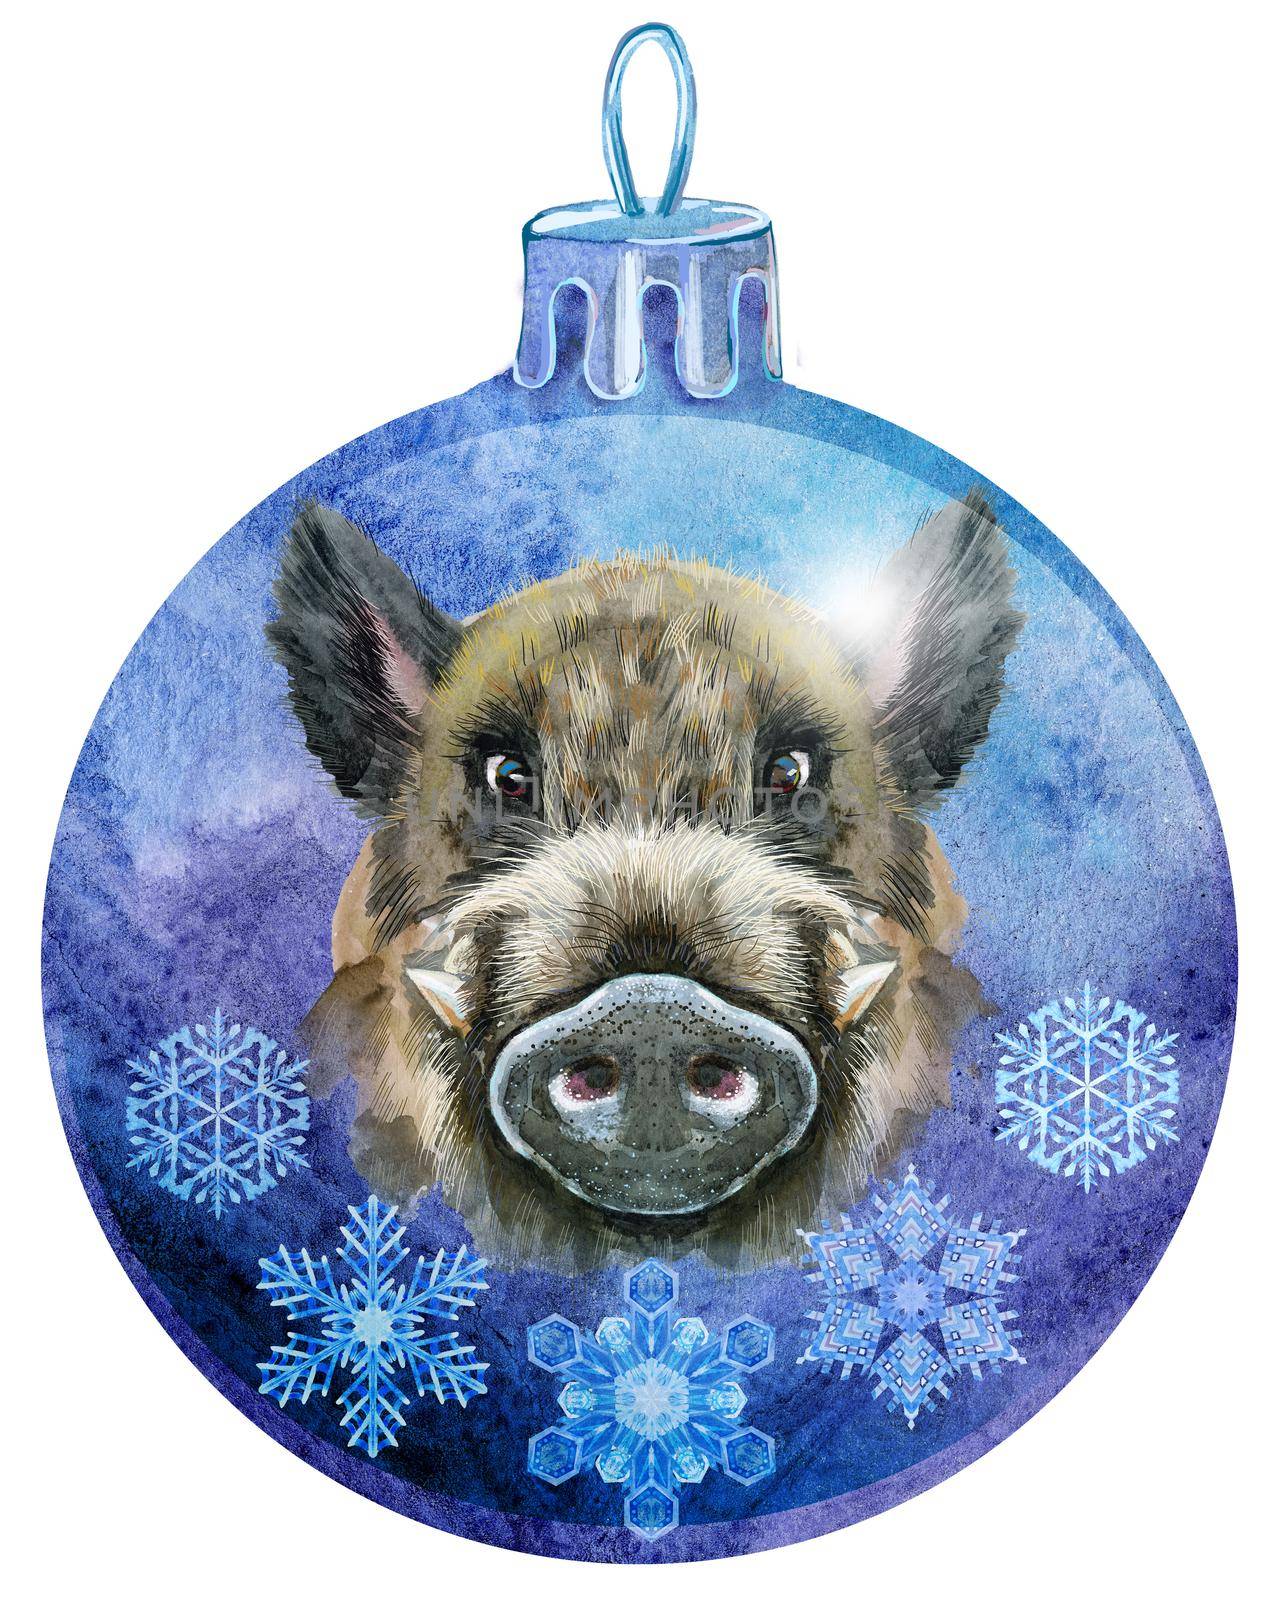 Watercolor Christmas violet ball with with the image of a boar and snowlakes isolated on a white background.